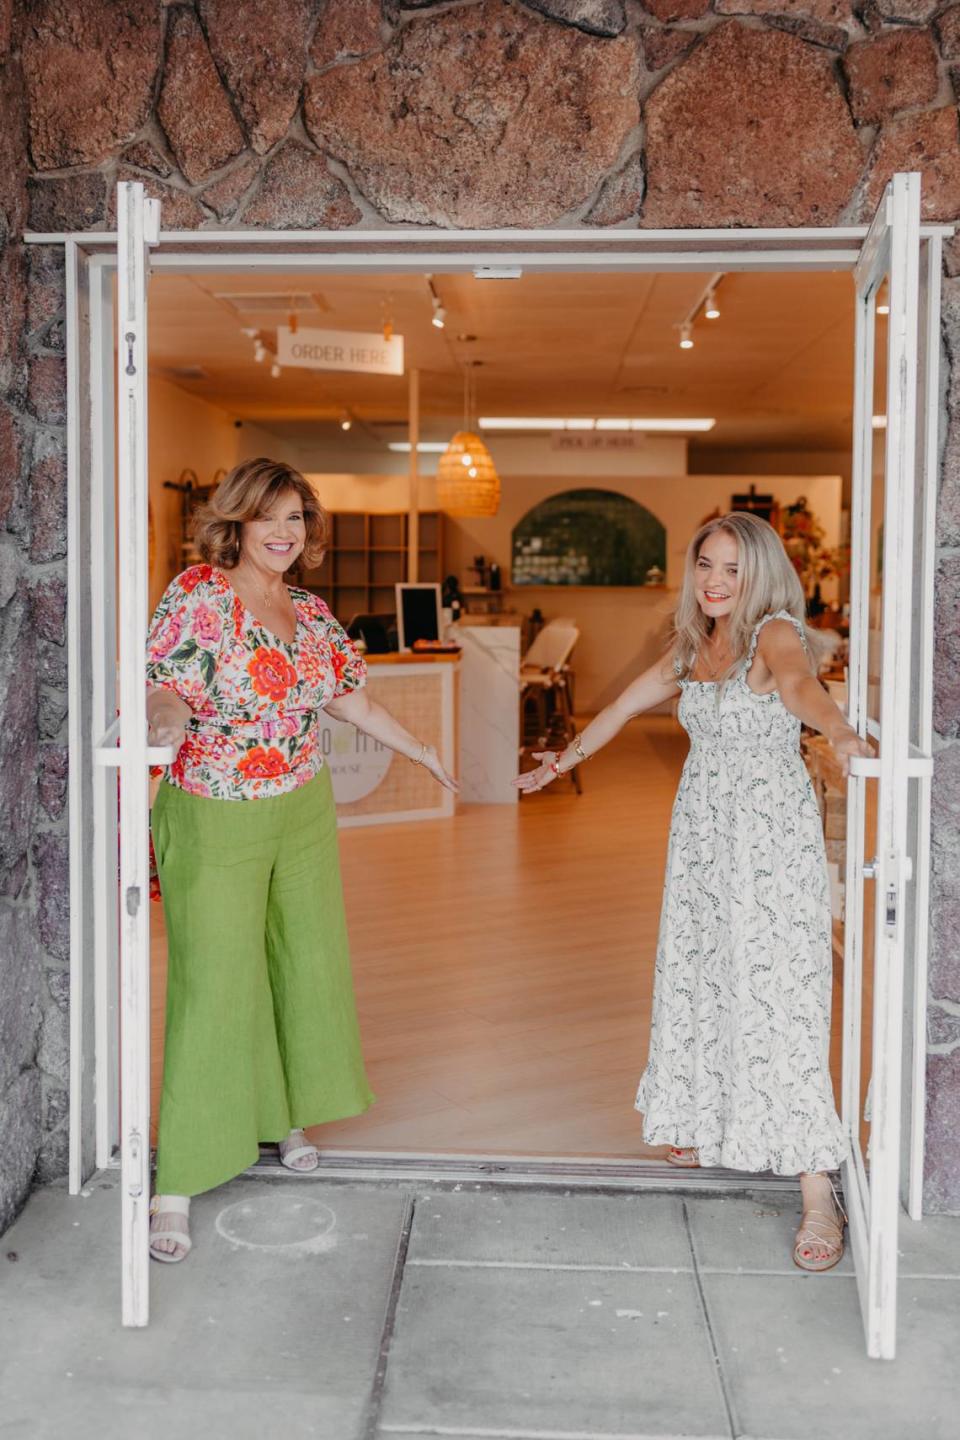 Roberta Chalaris and Marina De Albuquerque opened Roma House, a charcuterie, deli, wine and grocery at 617 The Parkway, Richland. Image courtesy Roma House